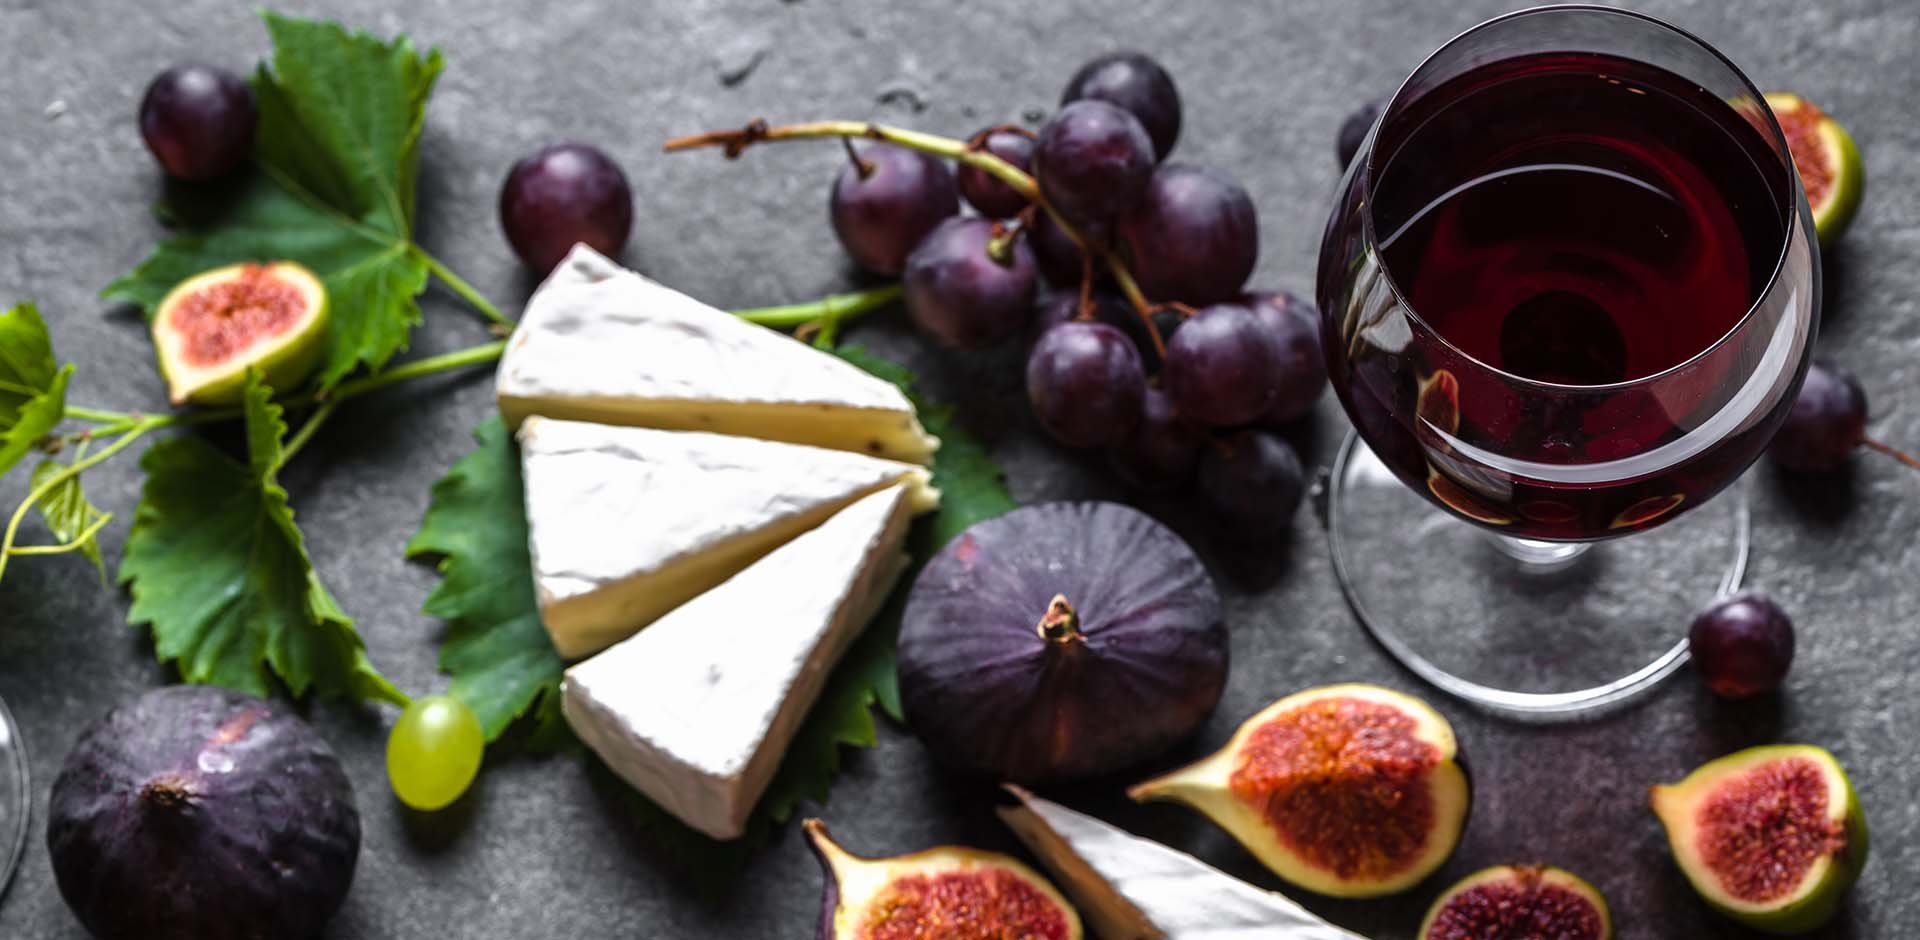 Cheese, wine and figs on the table.